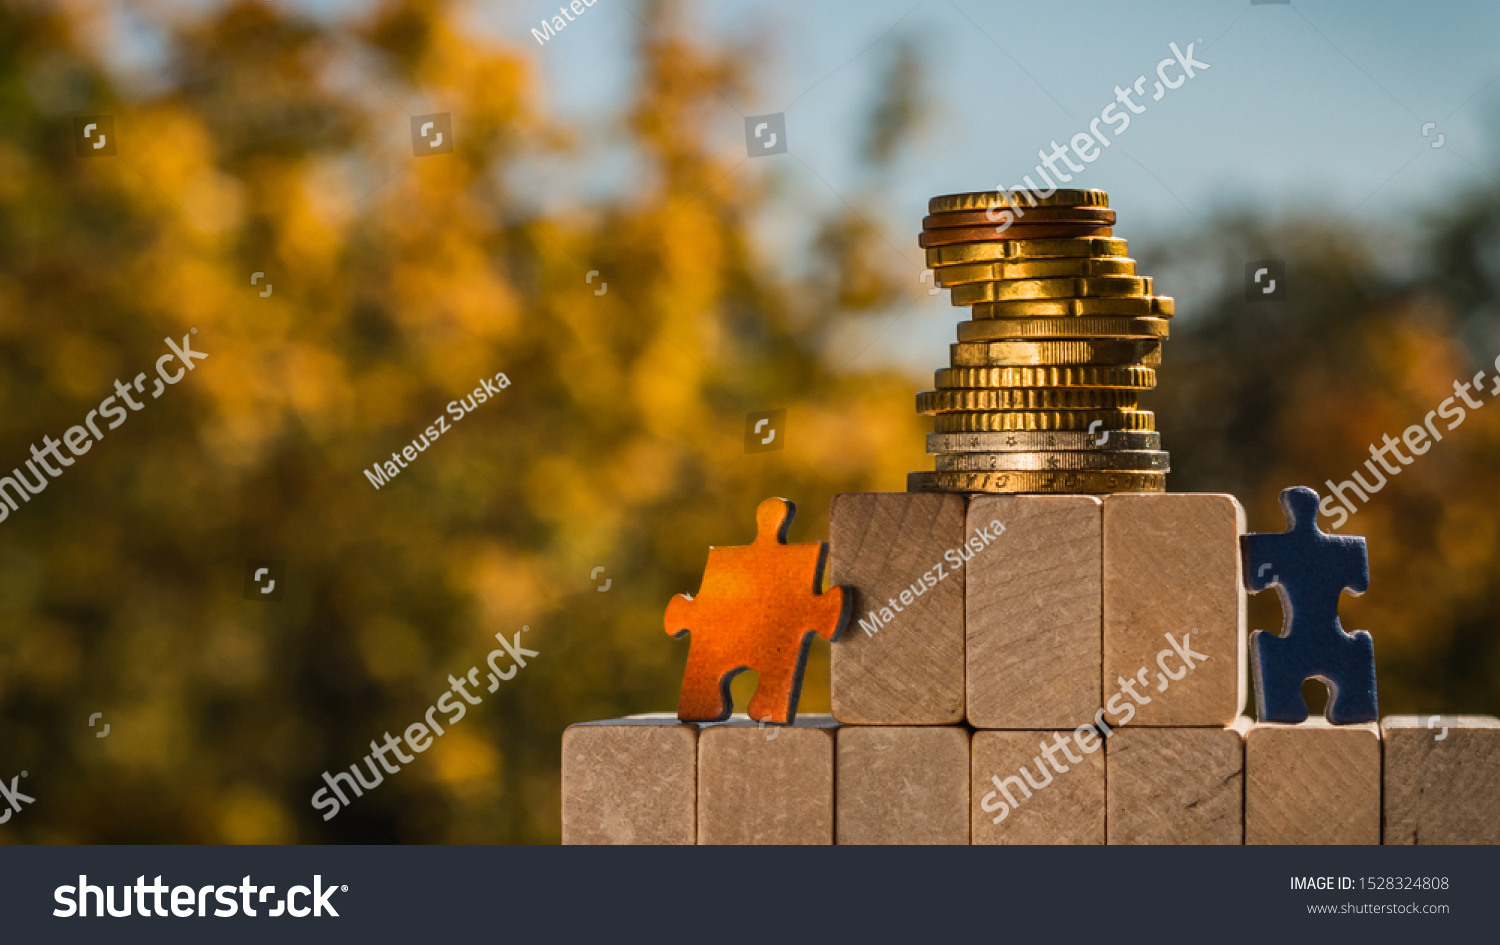 Several puzzles climb to the top of the pyramid made of wooden blocks. The concept of achieving business goals and reaching new levels of promotion. #1528324808